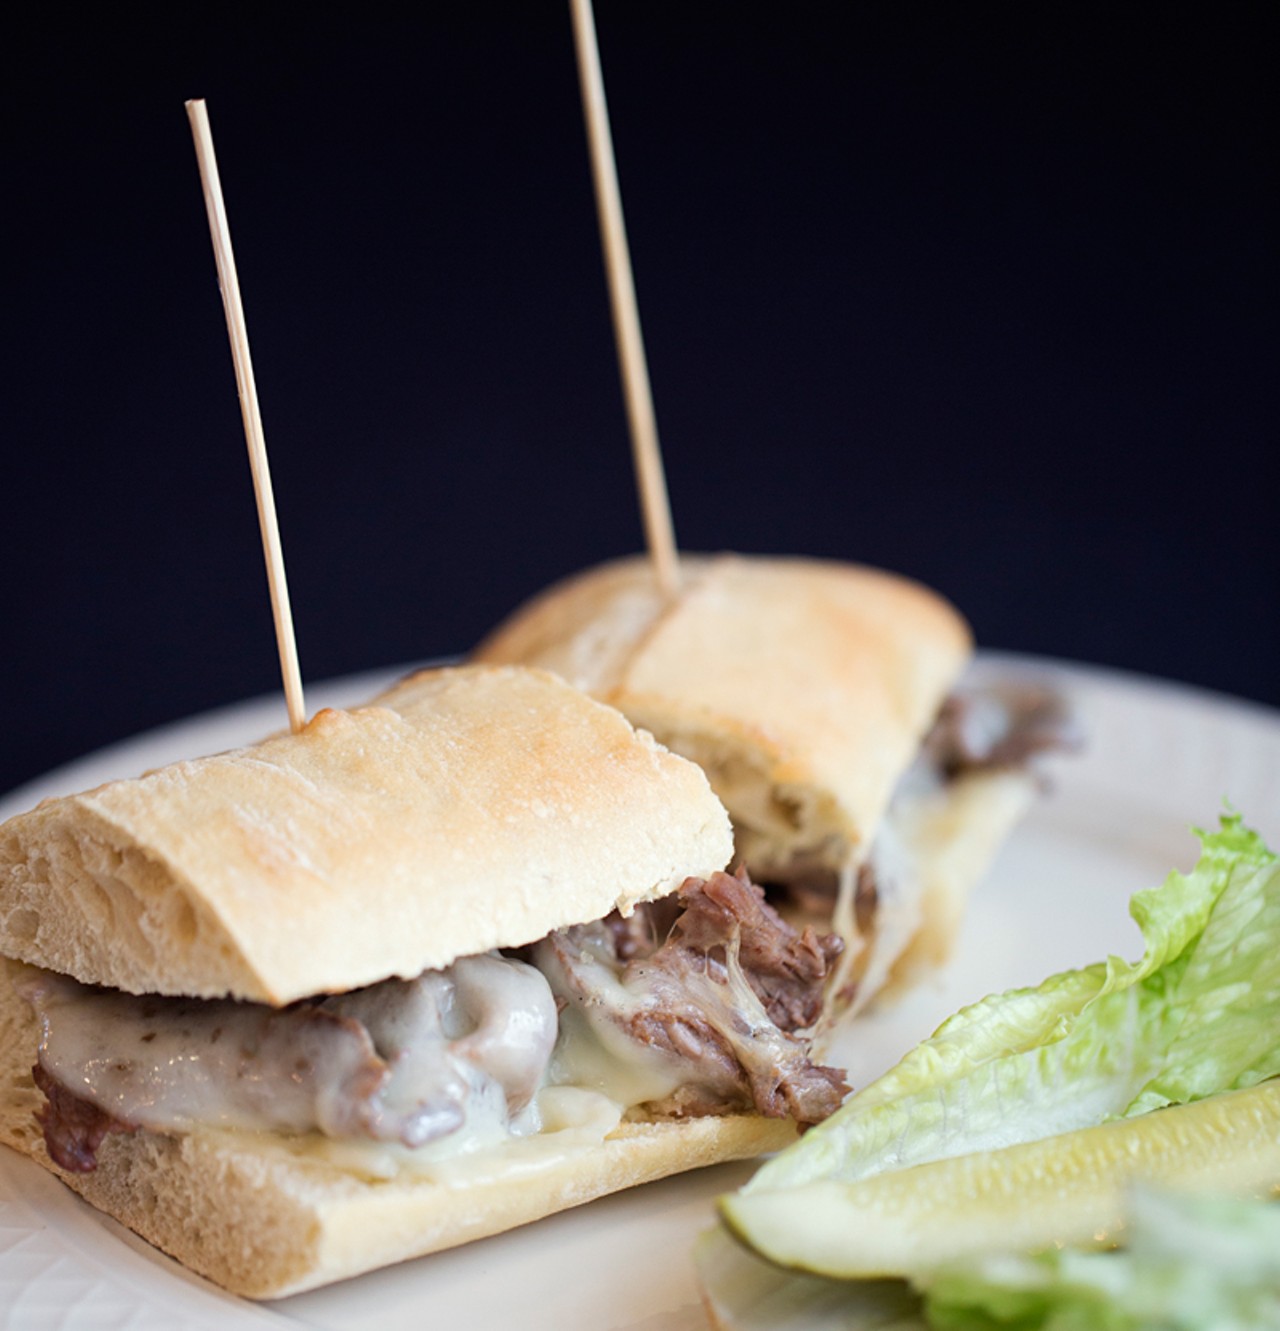 The BKAT Philly steak made with slow-cooked top sirloin.